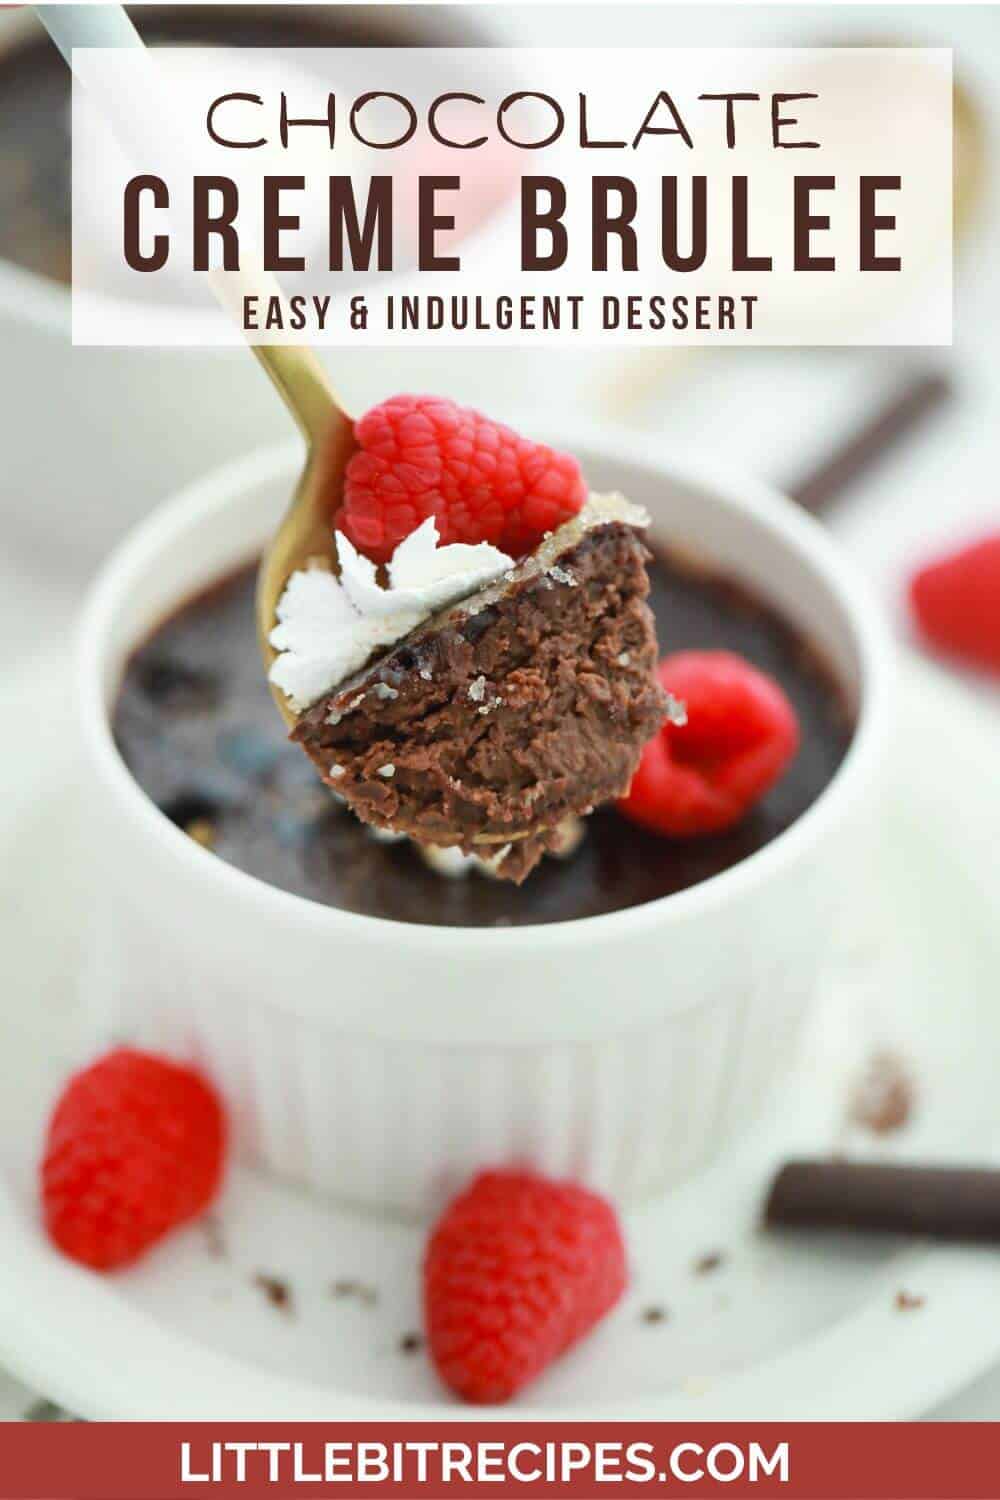 Chocolate creme brulee with text.